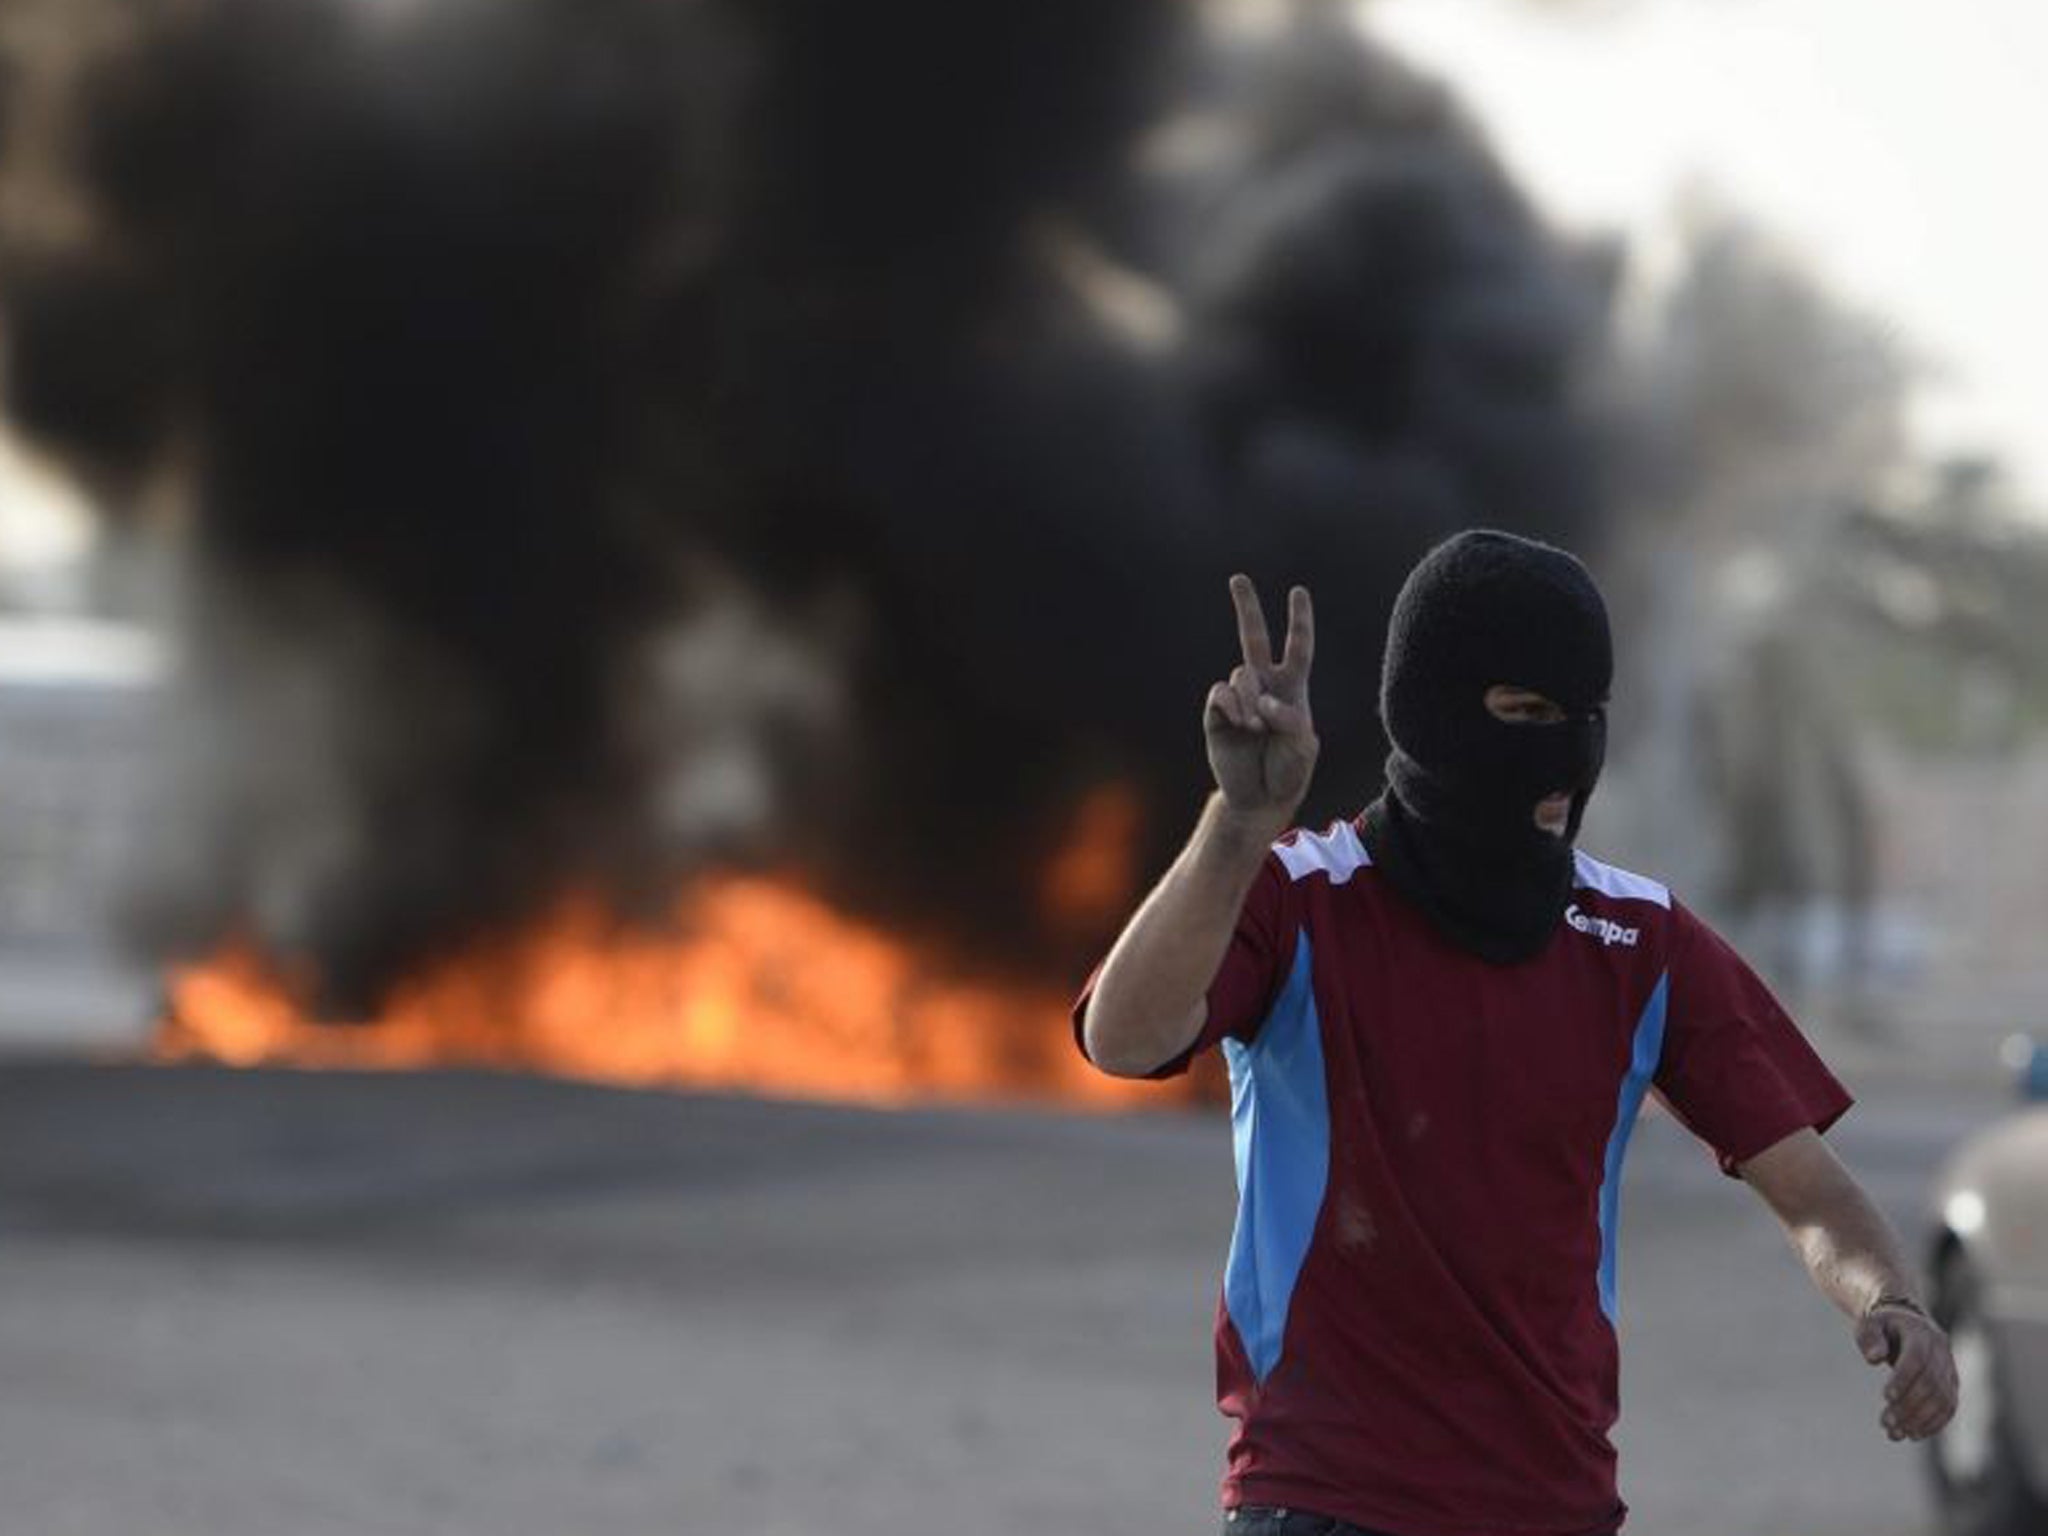 An anti-F1 protester flash the 'V' sign after setting tyres on fire to block a road in Sanabis village, on the outskirts of the Bahraini capital Manama